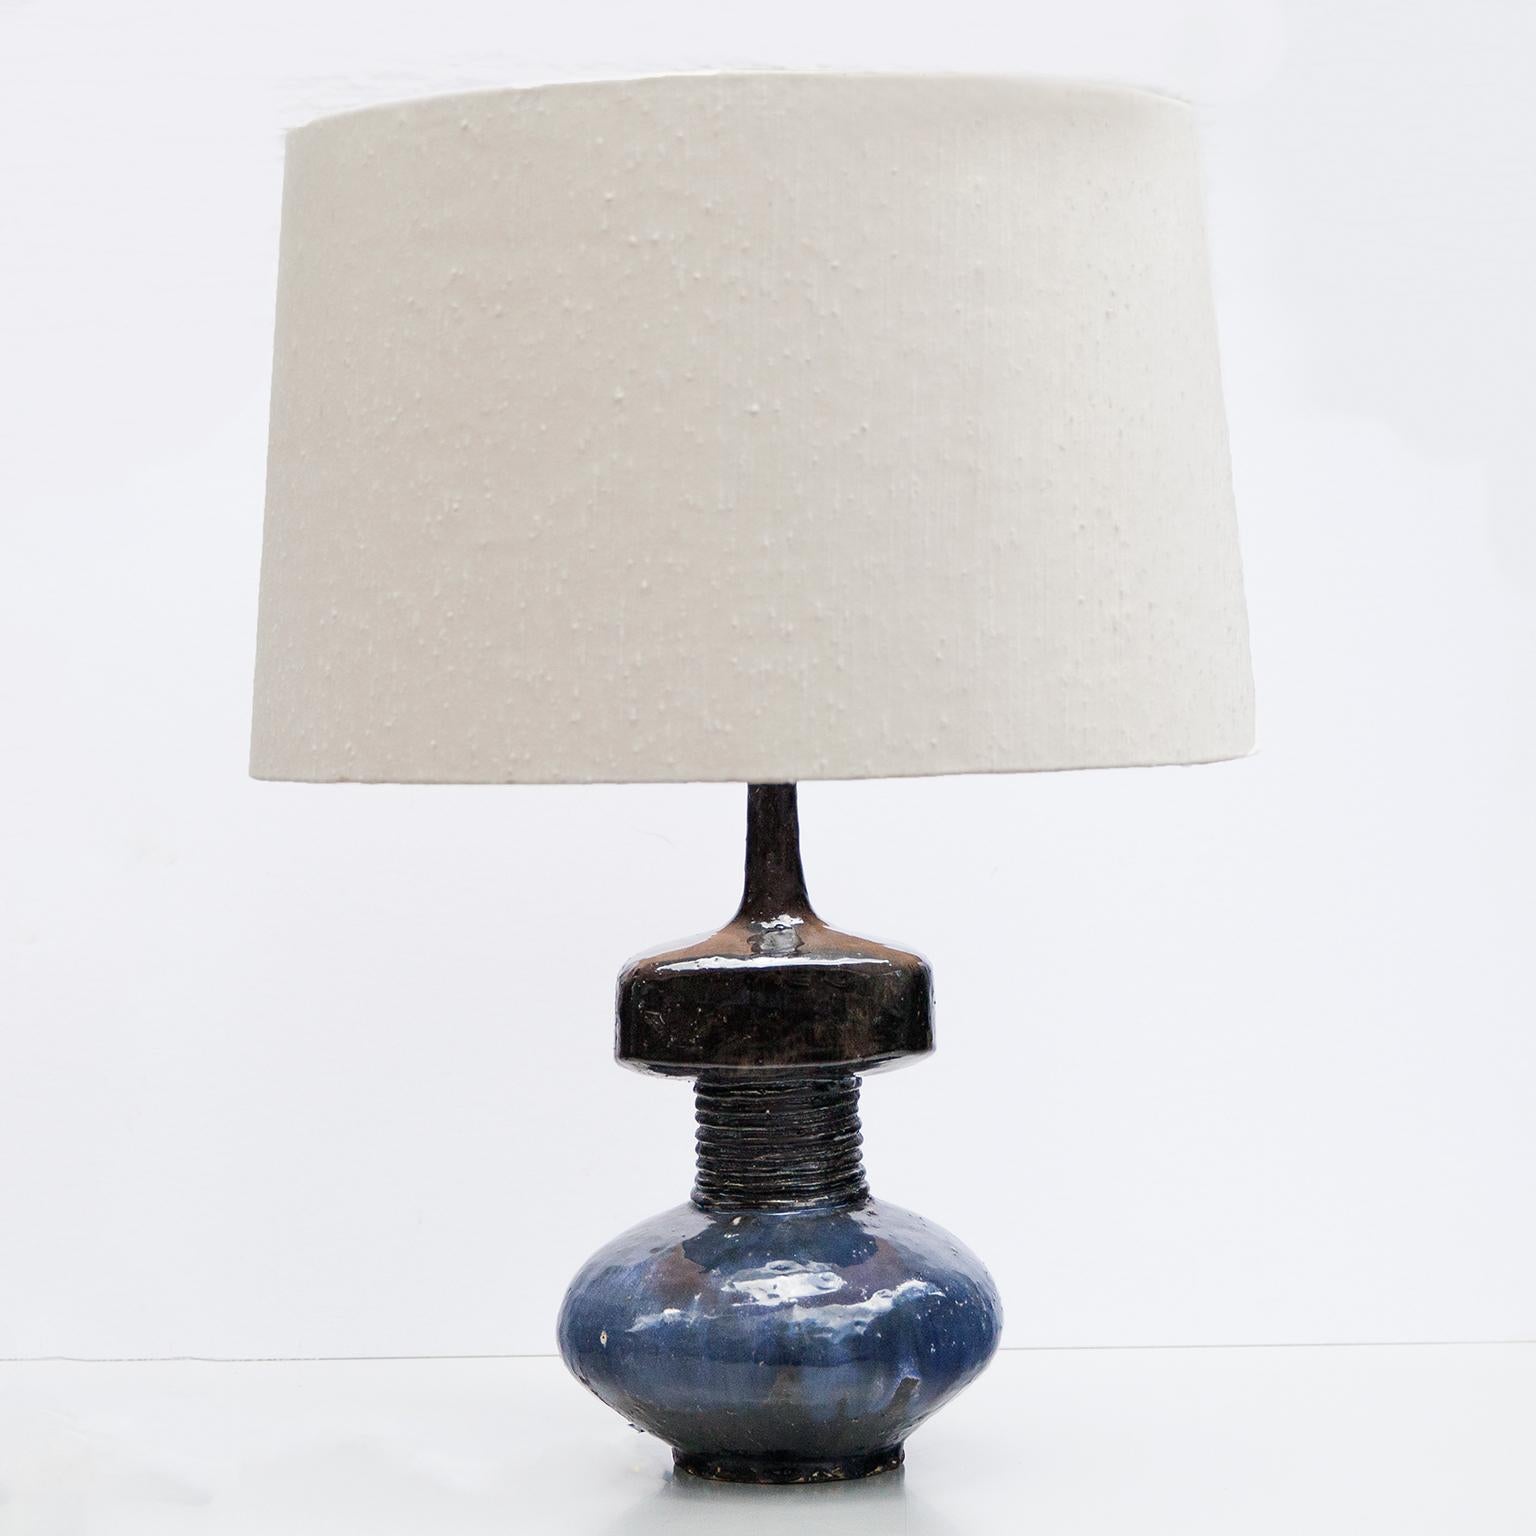 Wonderful organic blue glazed ceramic table lamp with a wild silk shade by Ingeborg und Bruno Asshoff from 1980s.
Marked on the bottom with workshop mark a (embossed stamp).
Literature: Ehrenpreis Deutsche Keramik 1994. Ingeborg und Bruno Asshoff.